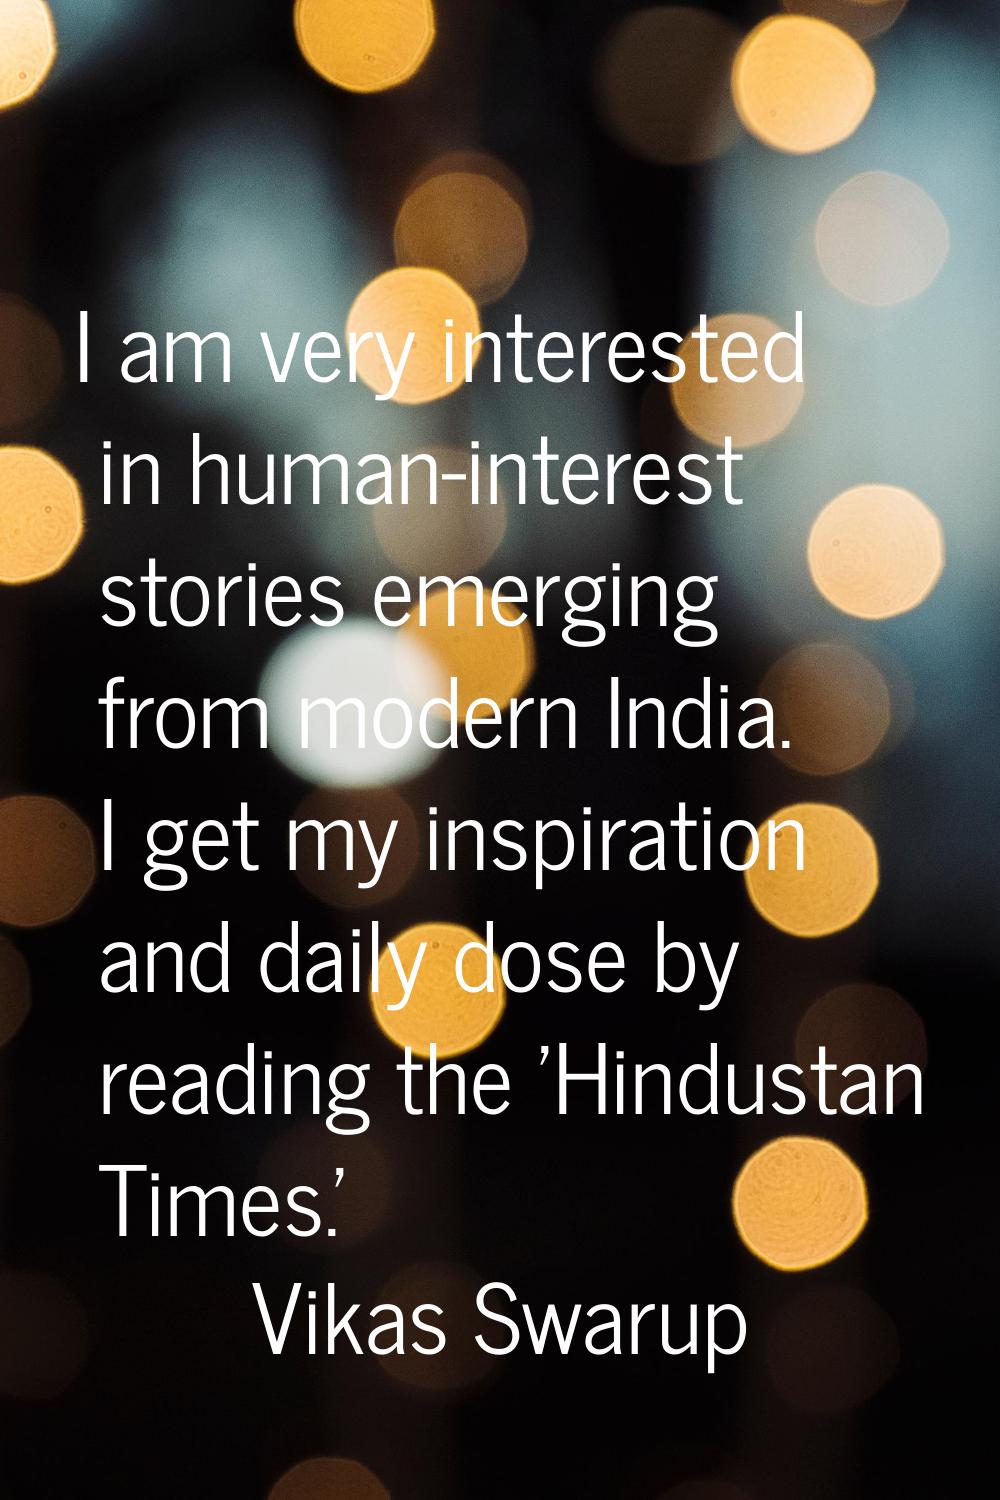 I am very interested in human-interest stories emerging from modern India. I get my inspiration and